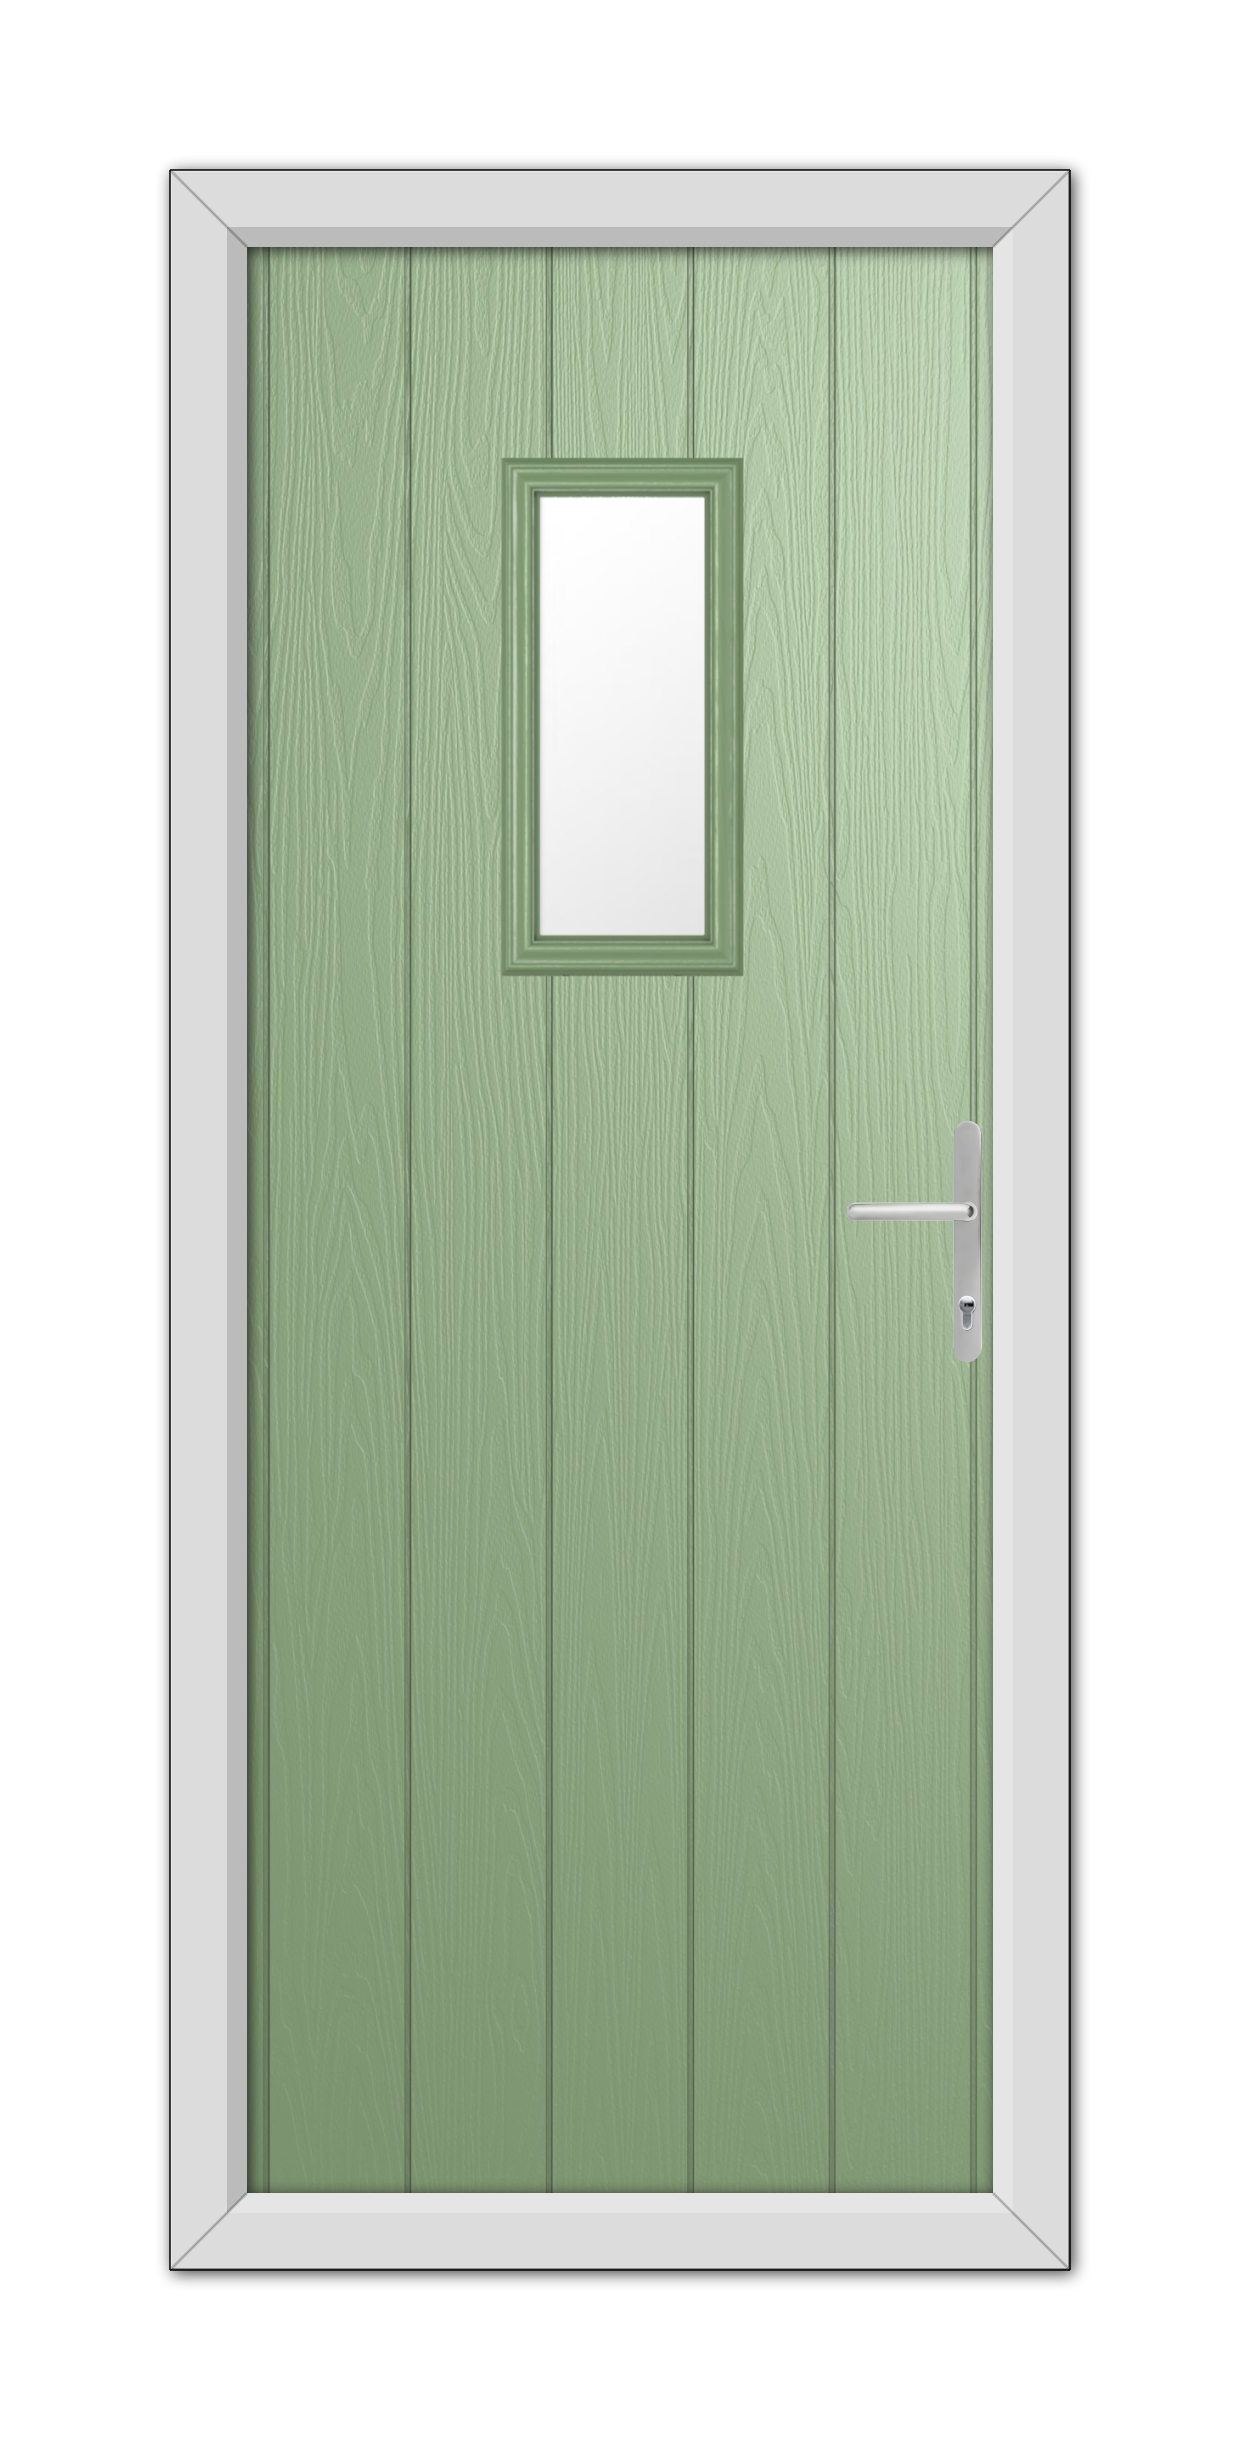 A Chartwell Green Somerset Composite Door 48mm Timber Core with a white square window at the center, framed in aluminum, viewed from the front.